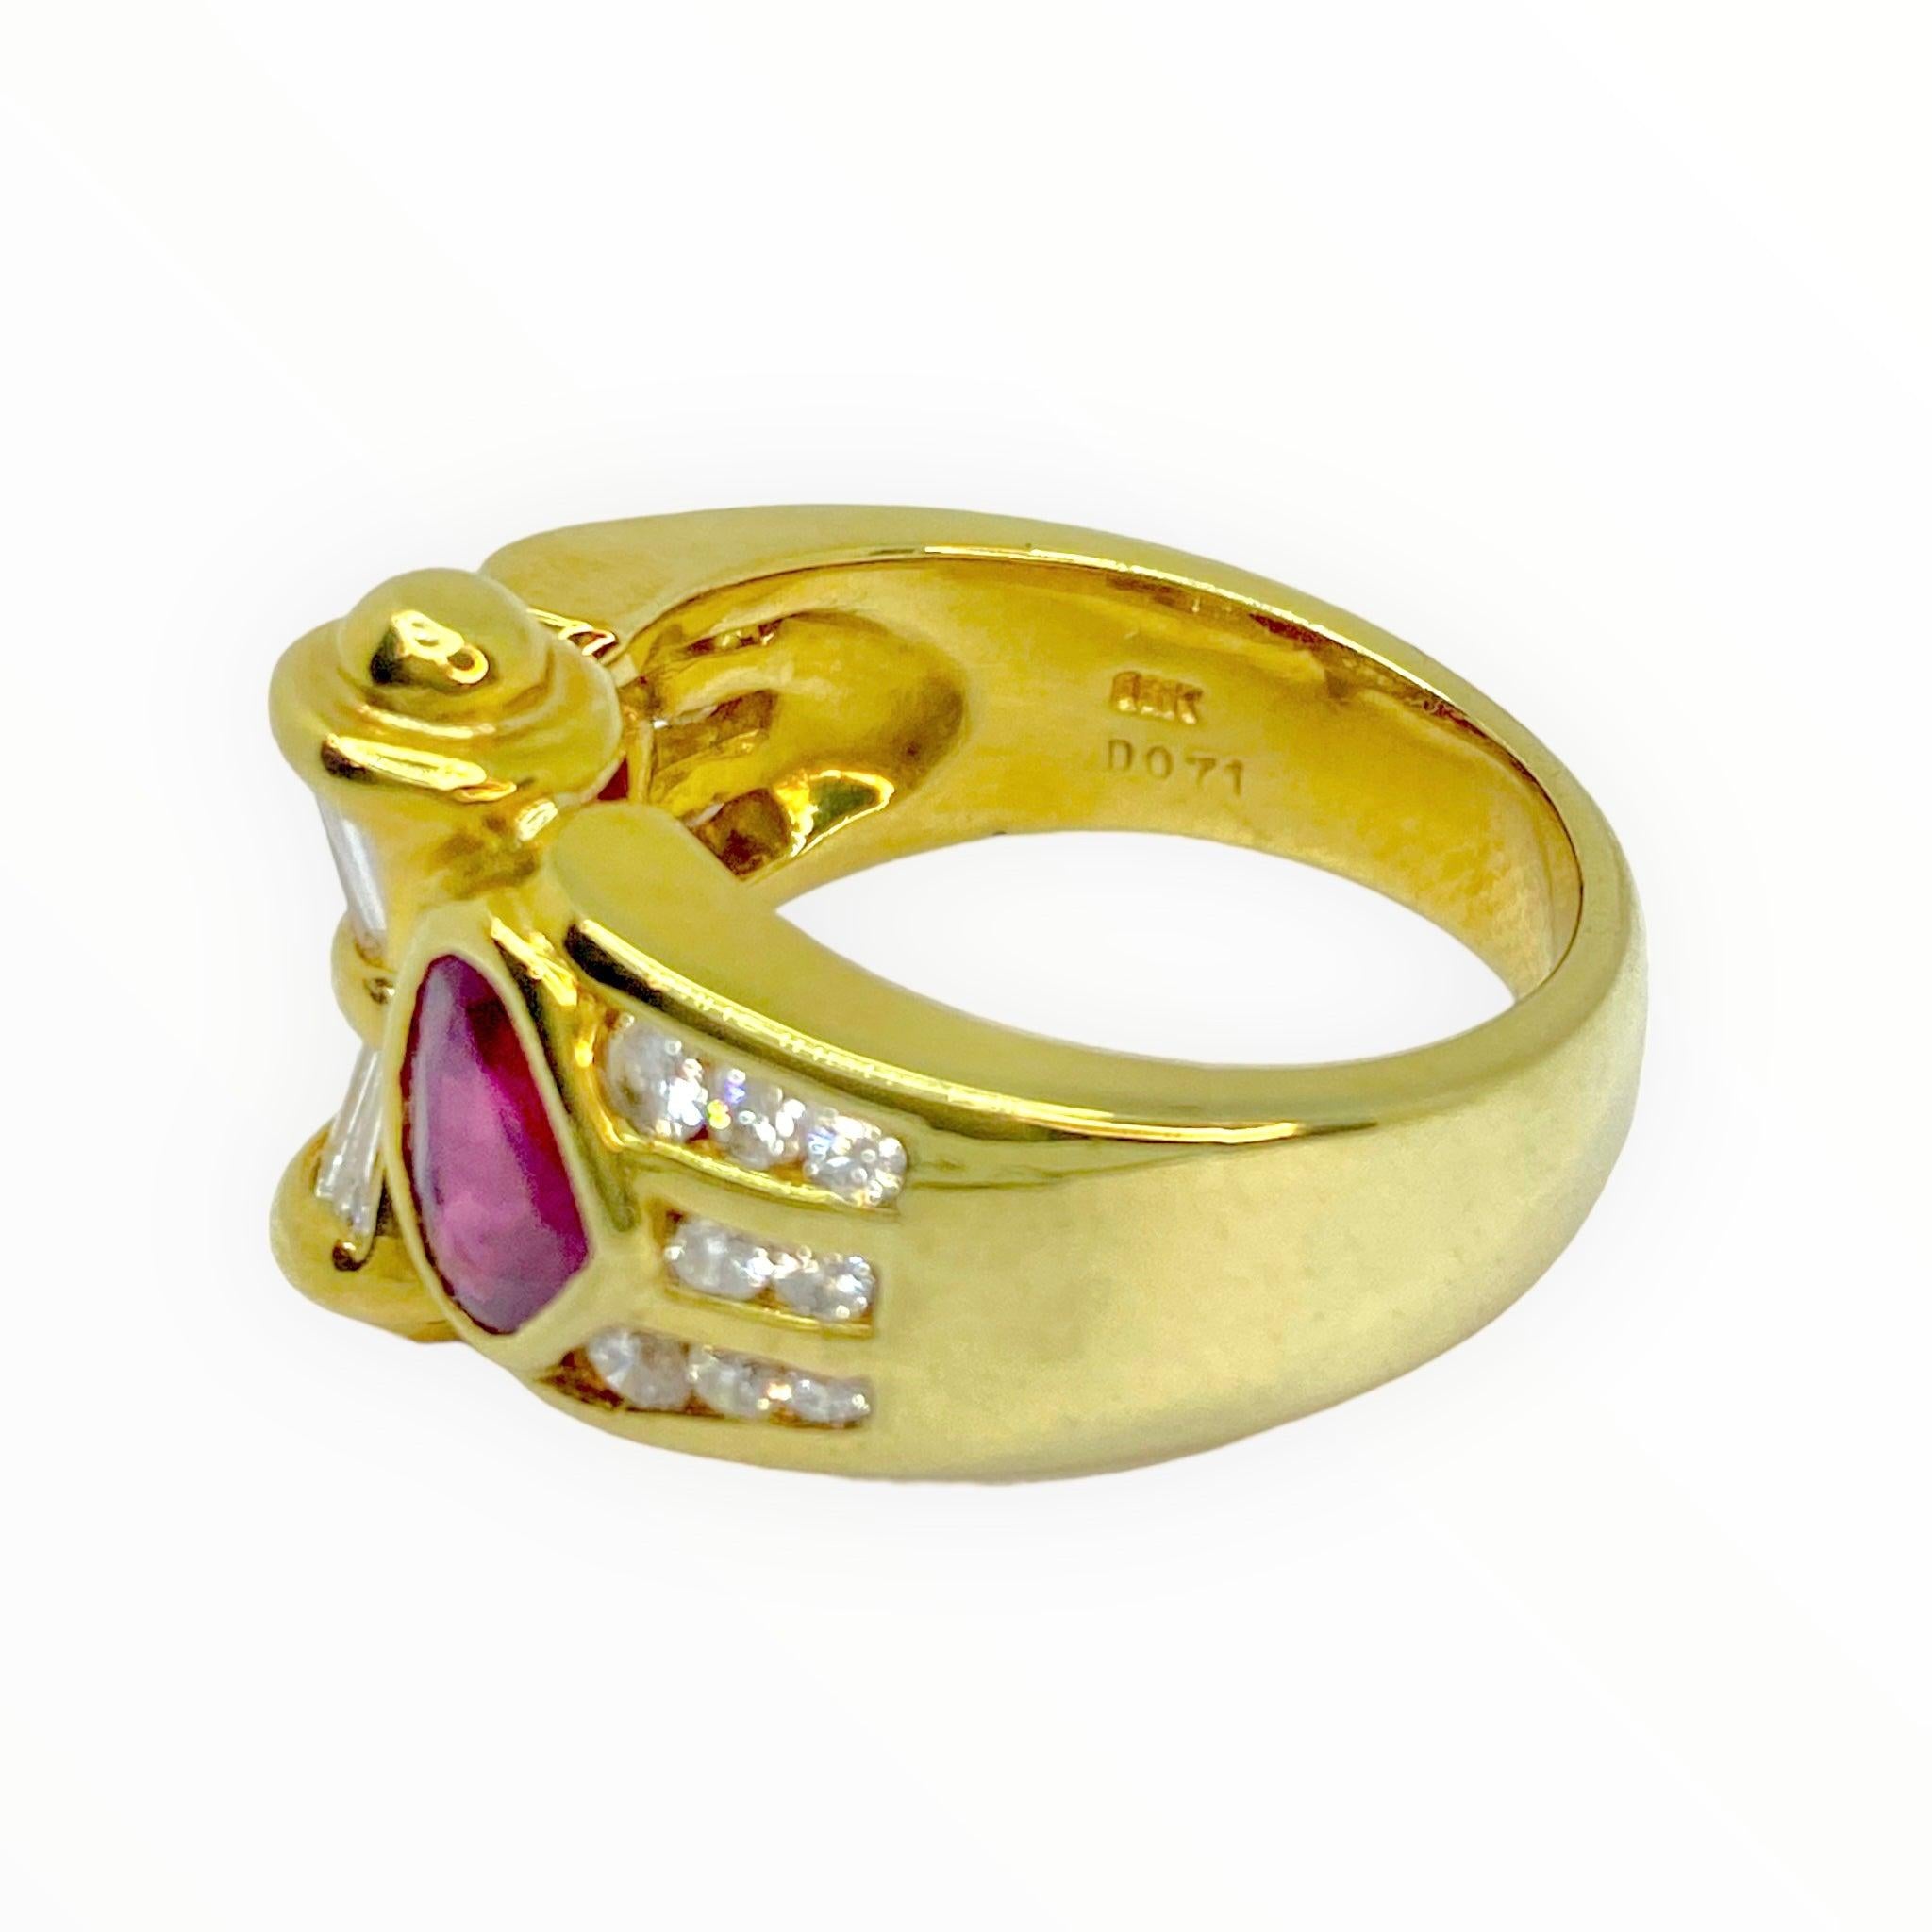 Crafted in 18K yellow gold, the ring features two pear shape rubies on the front with a scroll motif in the center. The scroll is set with tapered baguette cut diamonds and accented with a gold bead on top and bottom. Diamond set graduating